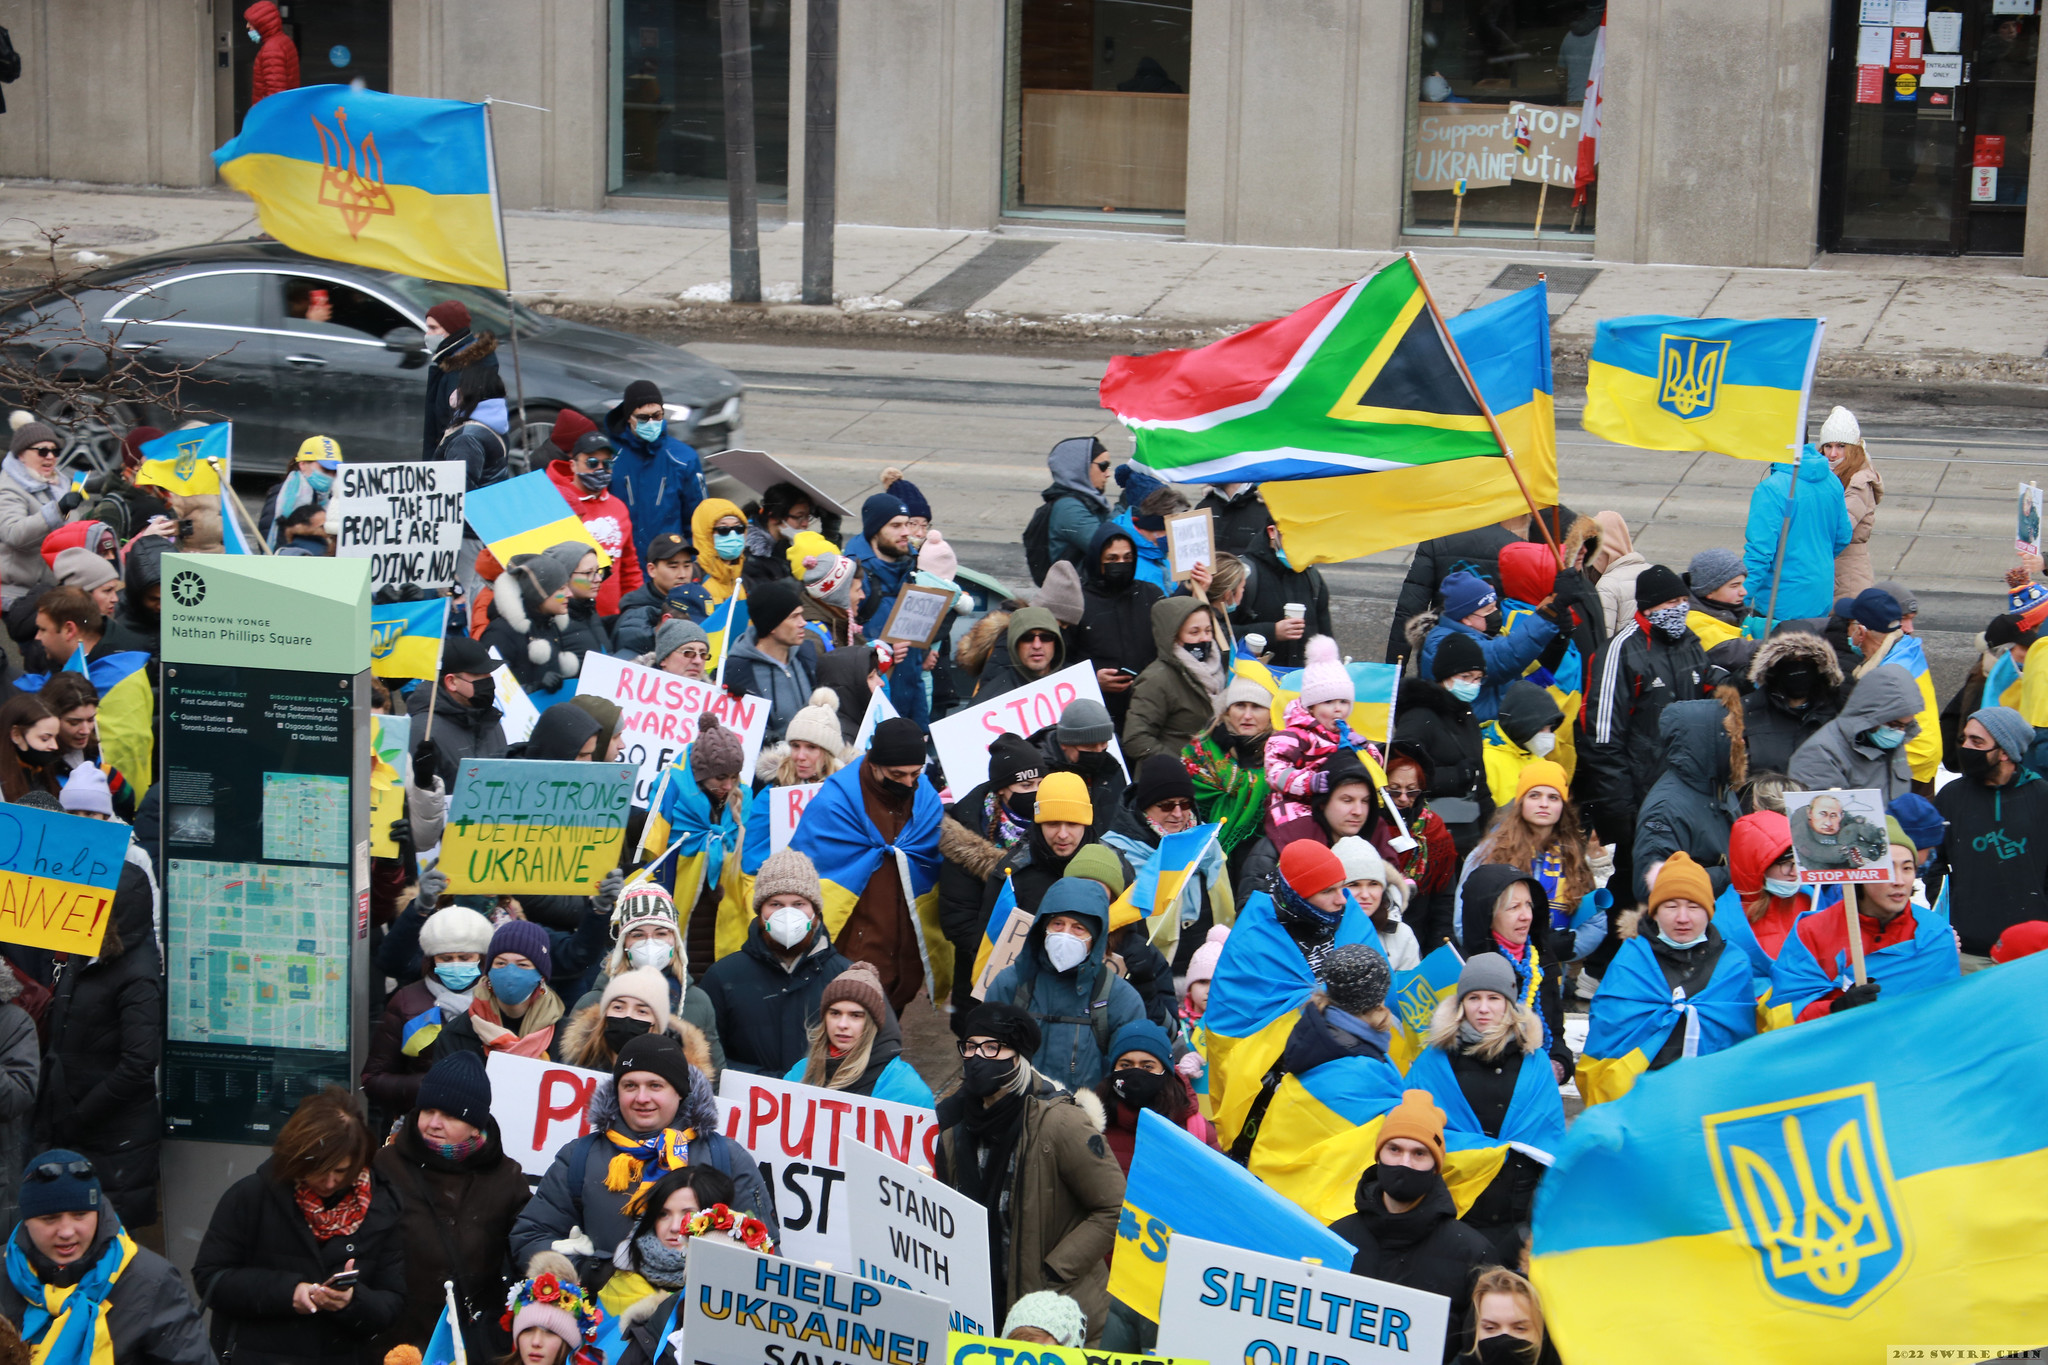 "South African community supports Ukraine" by Swire Chin. This file is licensed under the Creative Commons Attribution-Non-Commercial 2.0 Generic license.